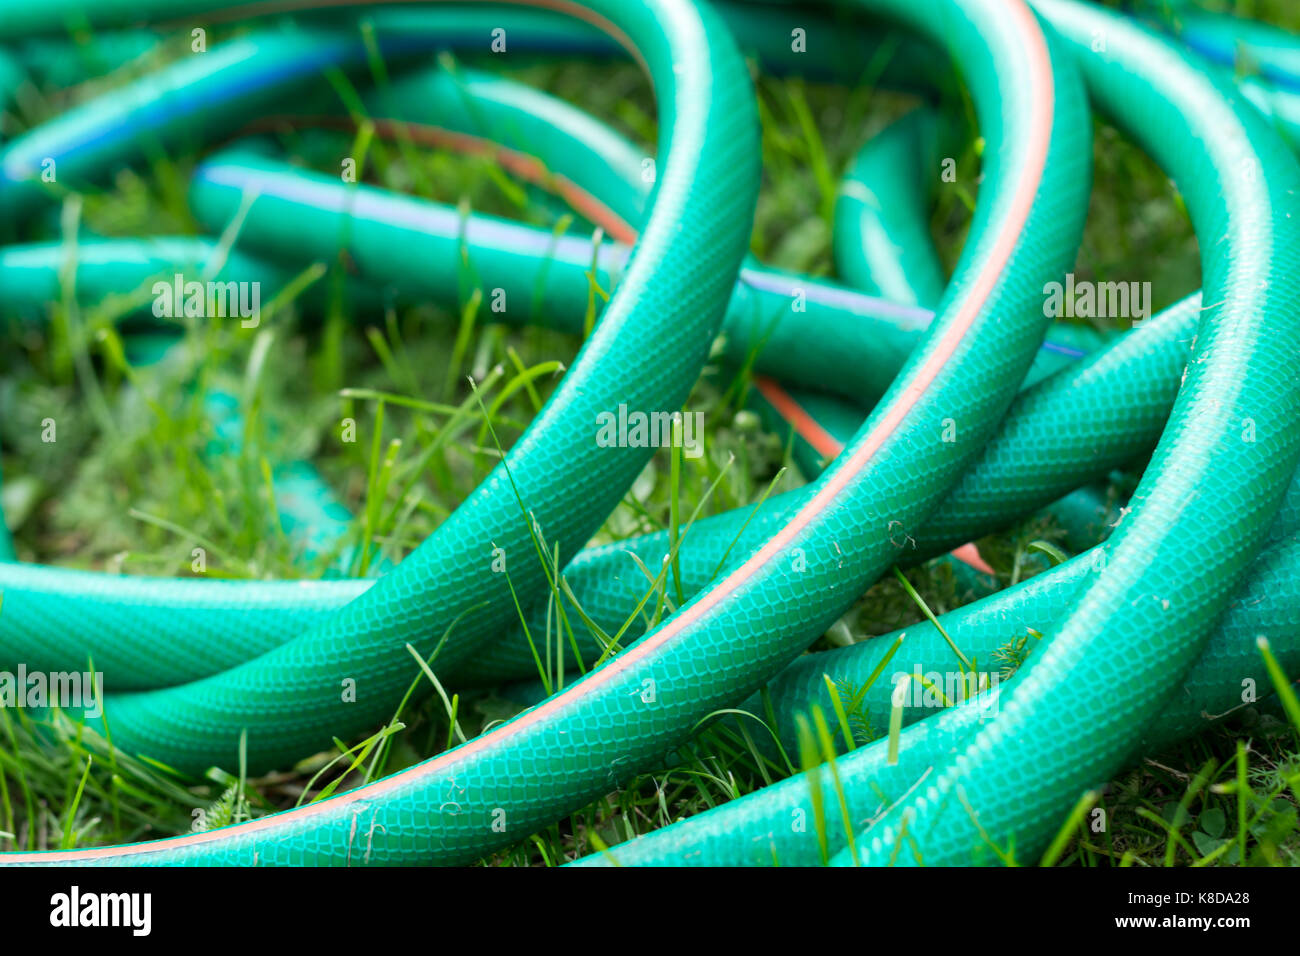 A green and orange hose for watering the garden close up Stock Photo